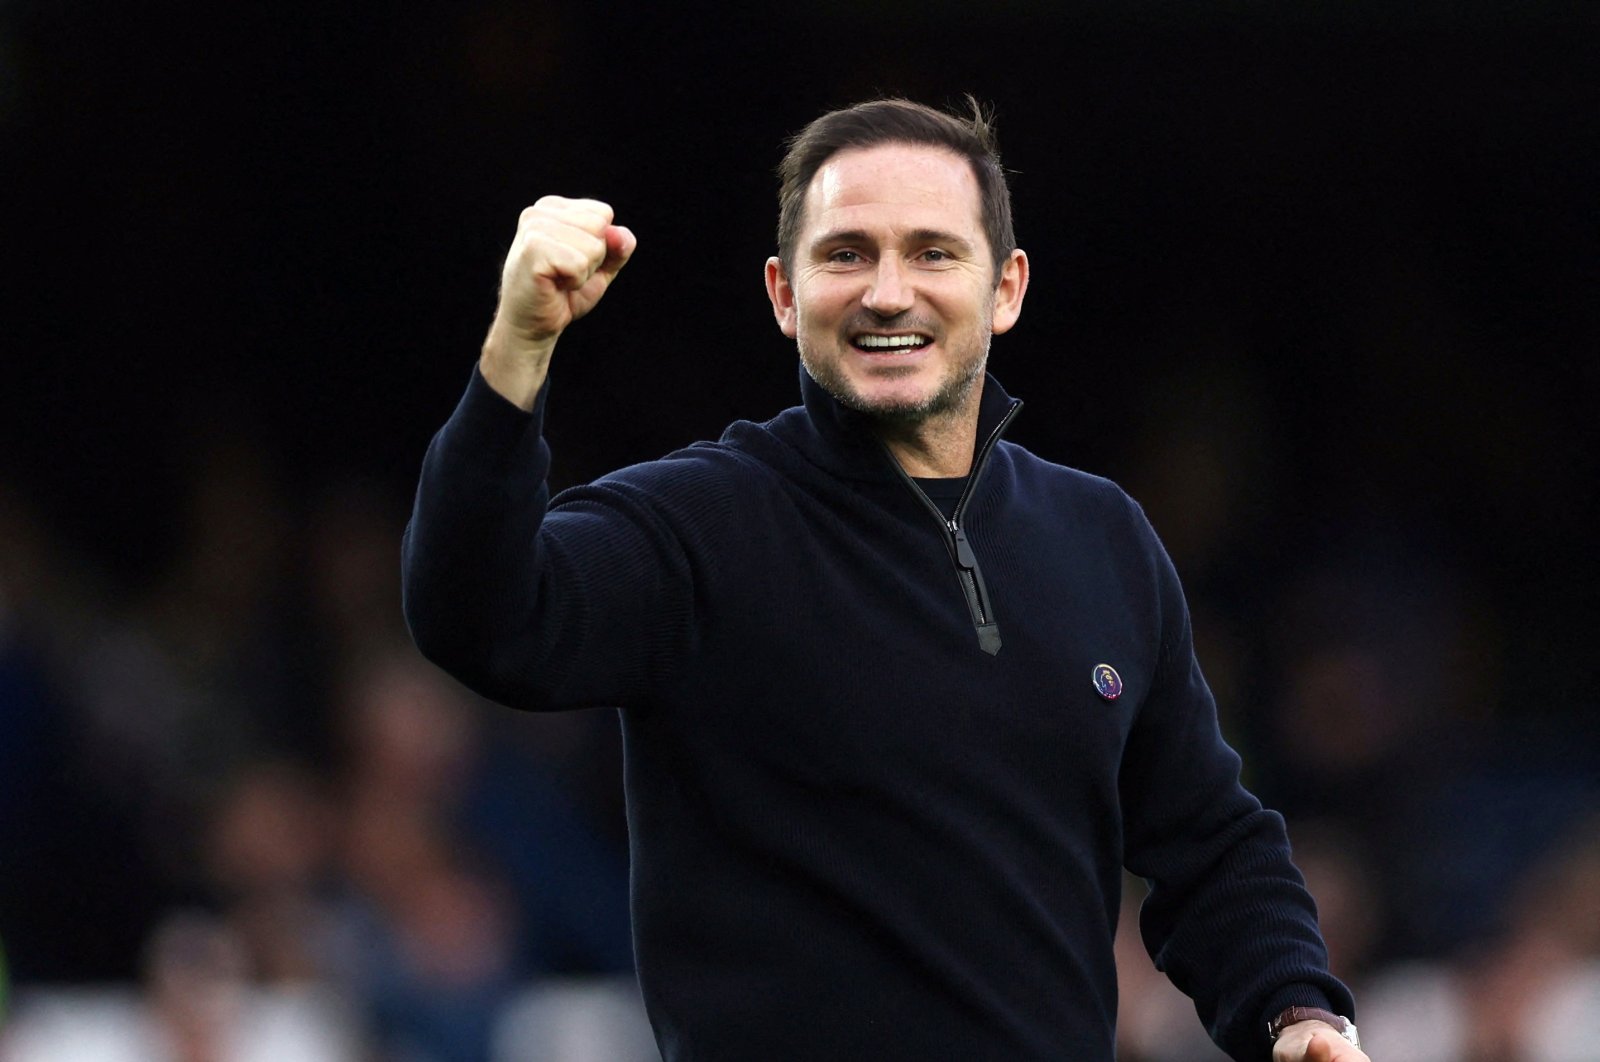 Then-Everton manager Frank Lampard, now Chelsea&#039;s interim manager, celebrates after the Everton, Crystal Palace match at Goodison Park, Liverpool, U.K., Oct. 22, 2022. (Reuters Photo)